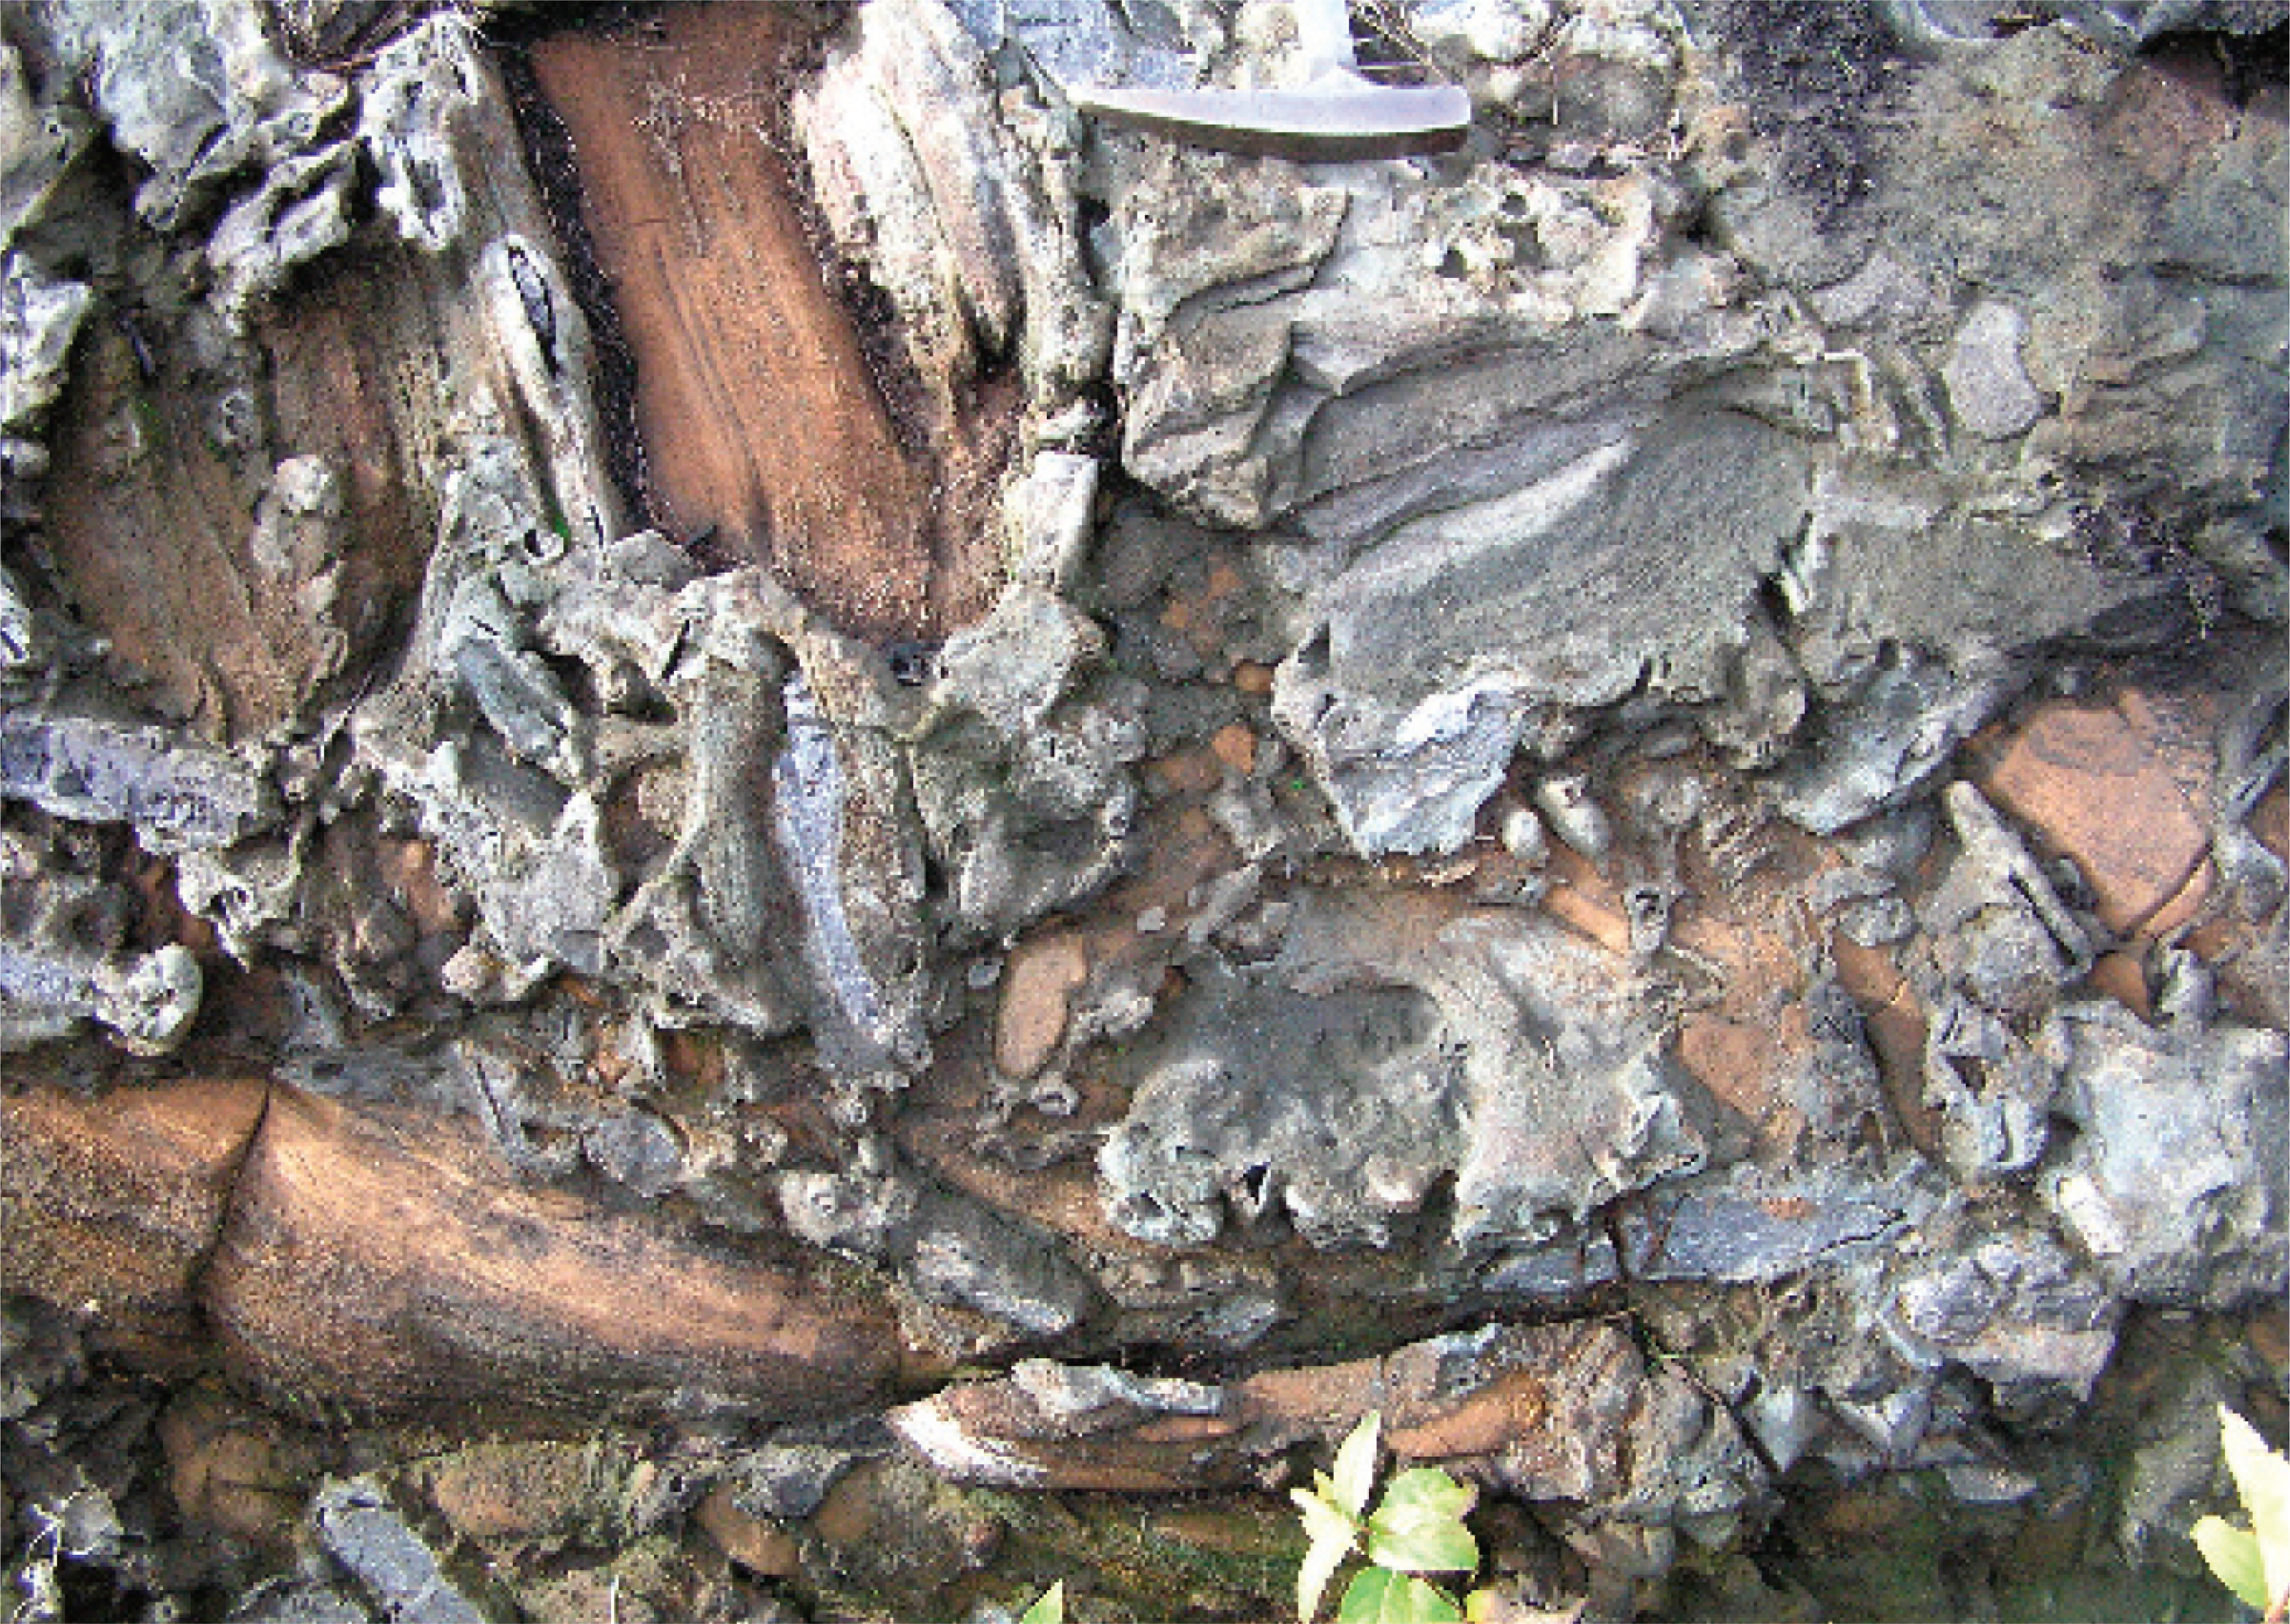 Reworked breccia containing iron-formation (reddish and gray-green fragments) and accretionary lapilli (gray spheres). Hammer head is 6 inches long.